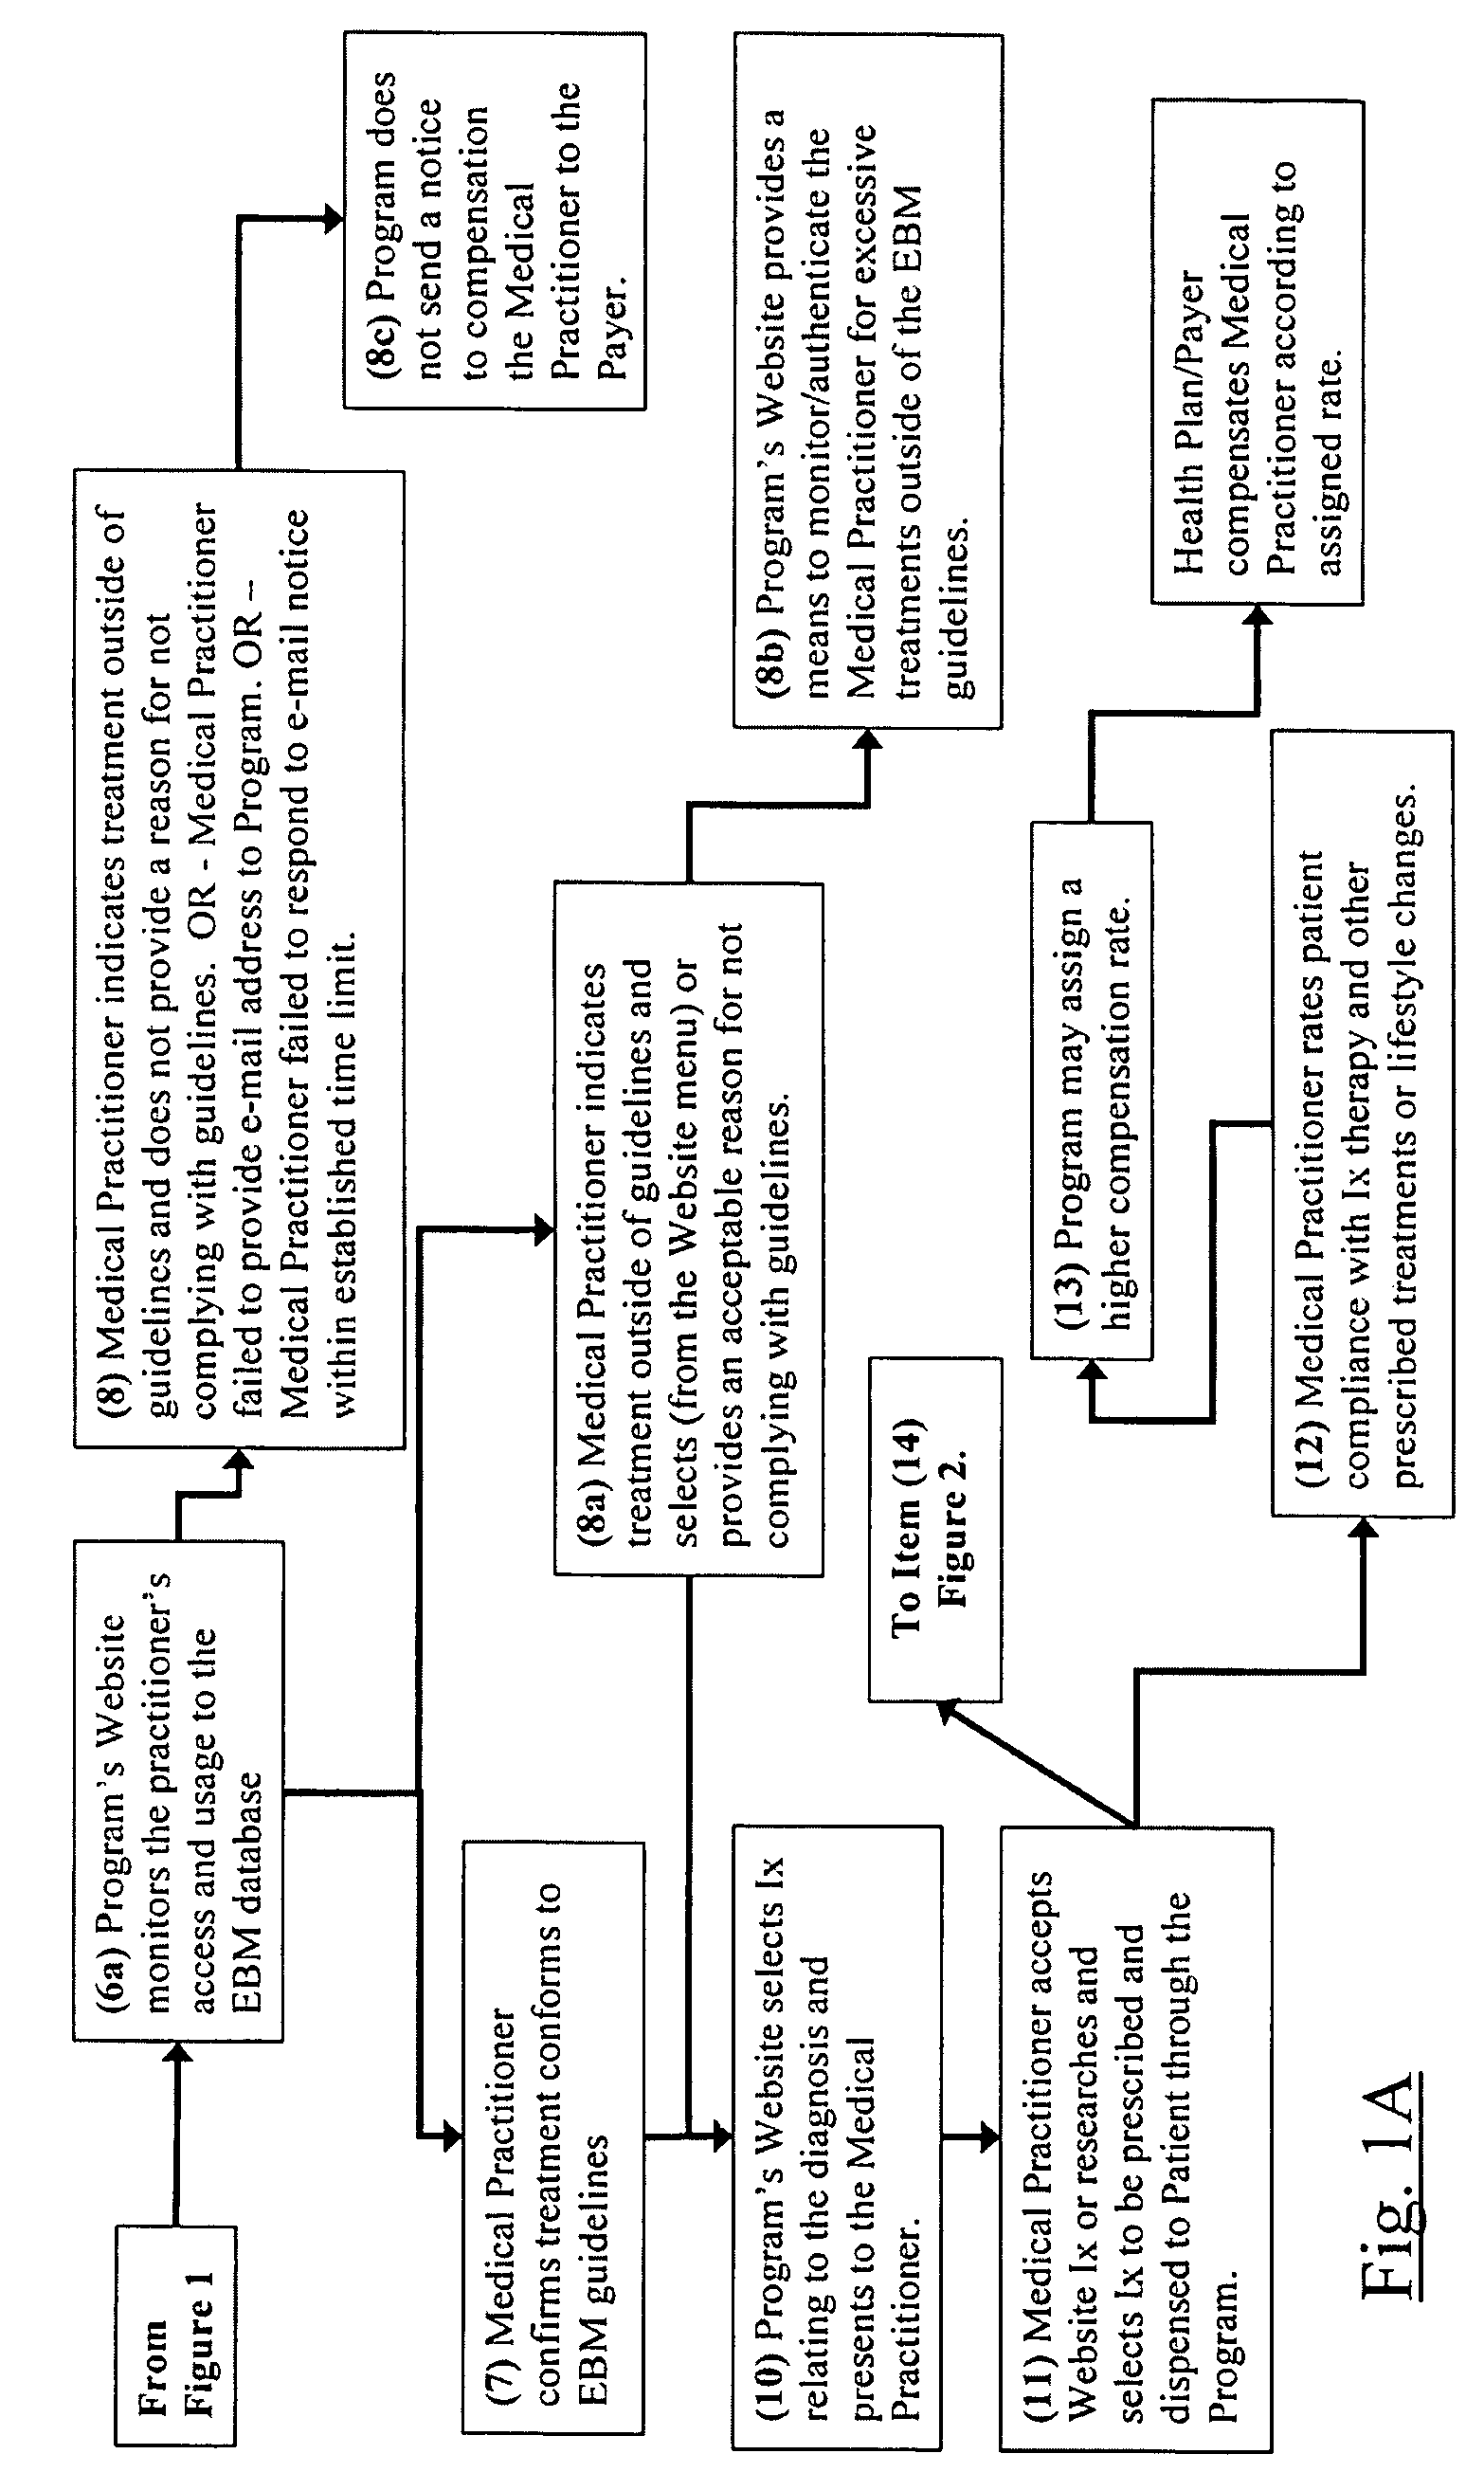 Method and system for delivery of healthcare services